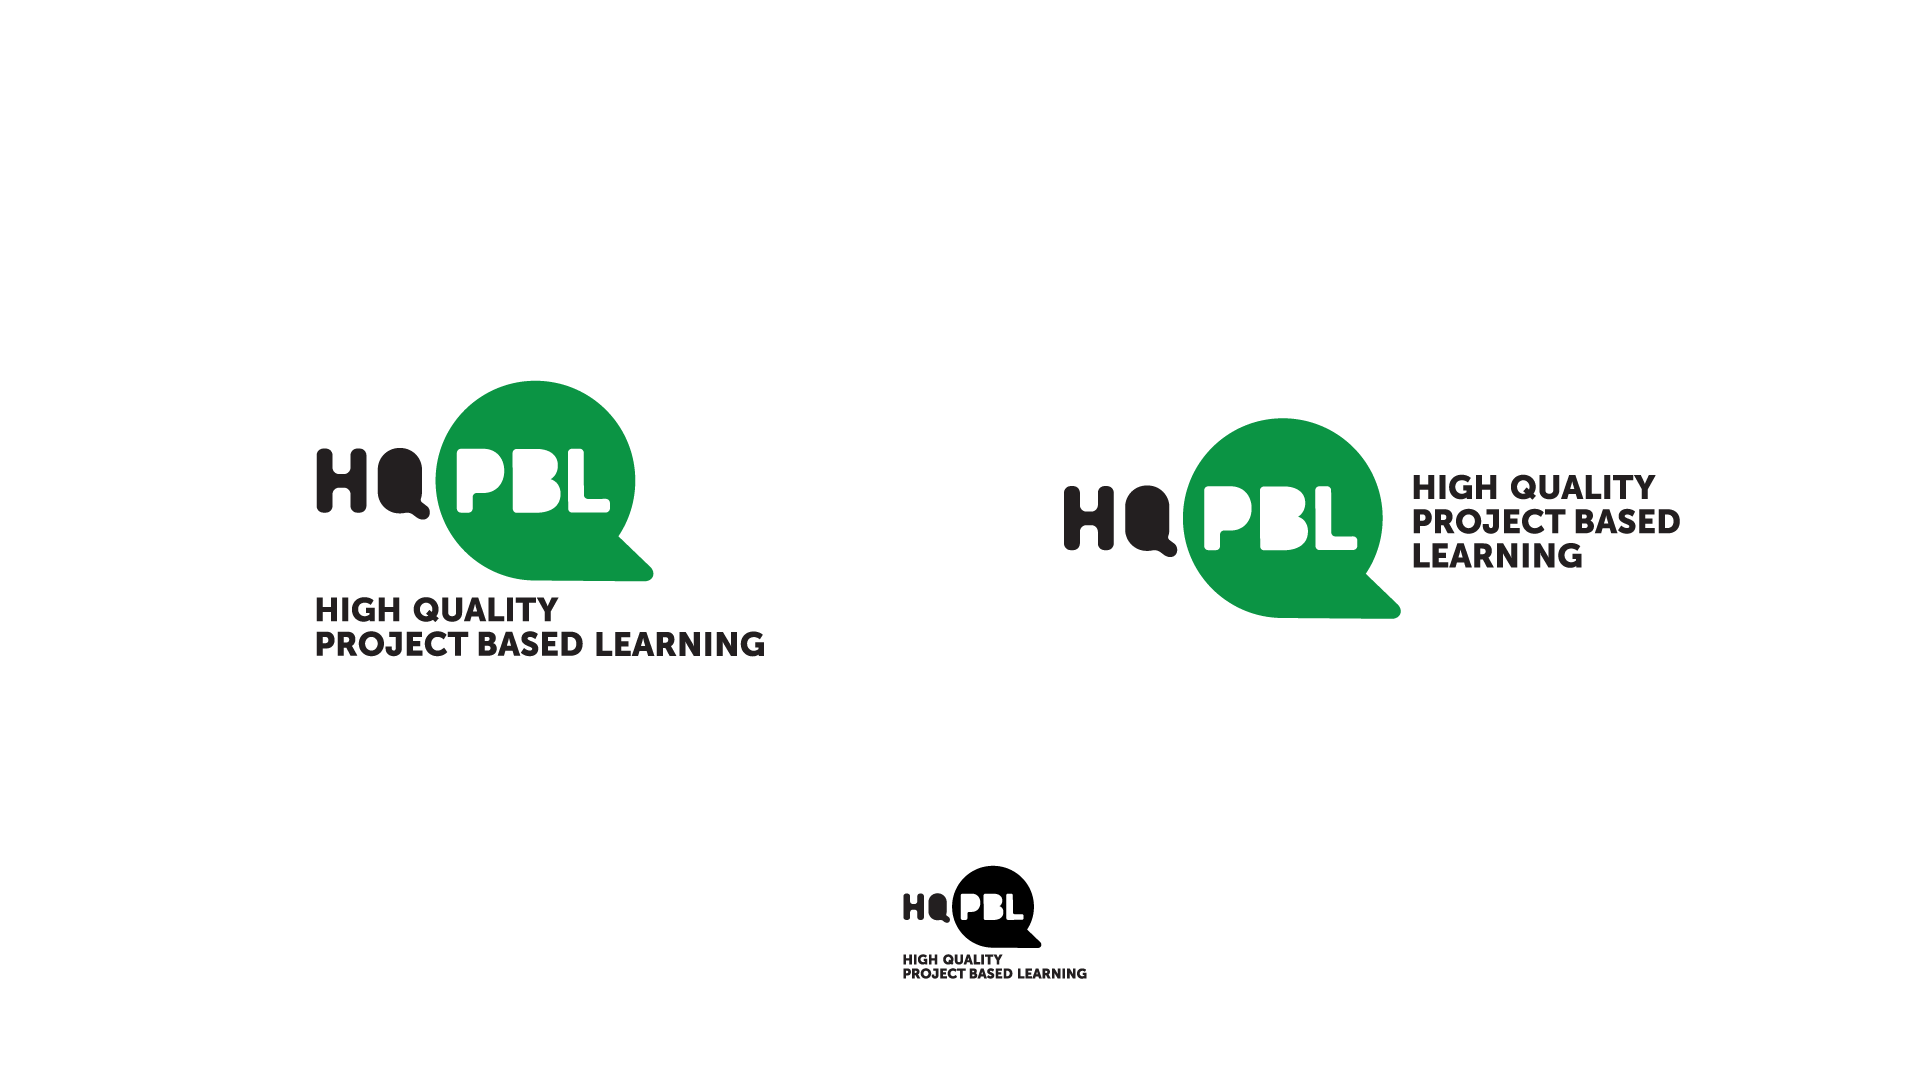  This design concept was inspired by the power skills of collaboration and communication that are among the benefits of project-based learning. The speech bubble is representative of the Q and creates a strong, iconic mark. These options explore the 